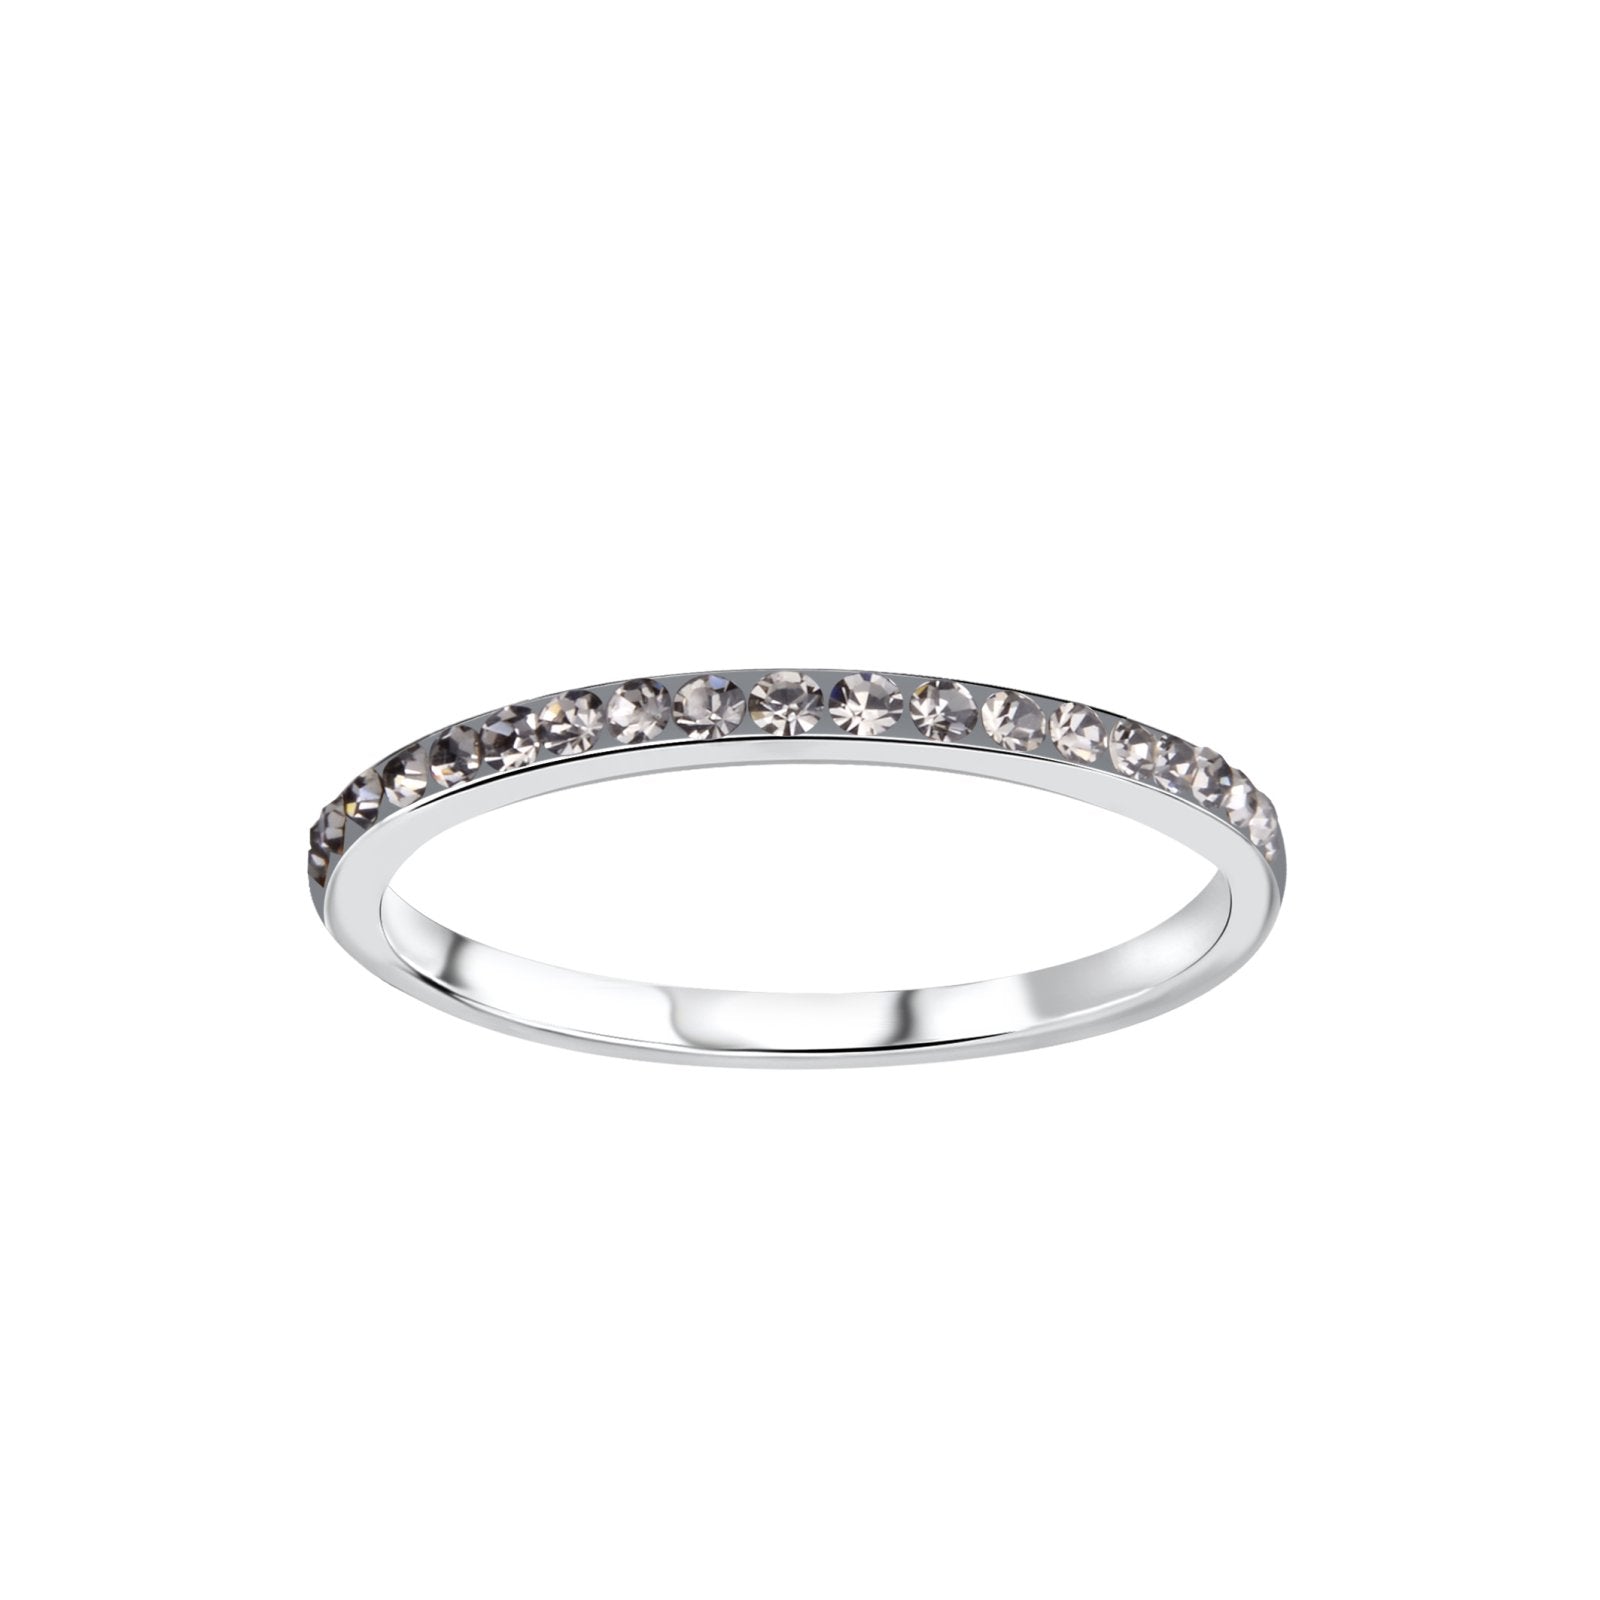 Eternity Silver Ring setting with Gray Crystal